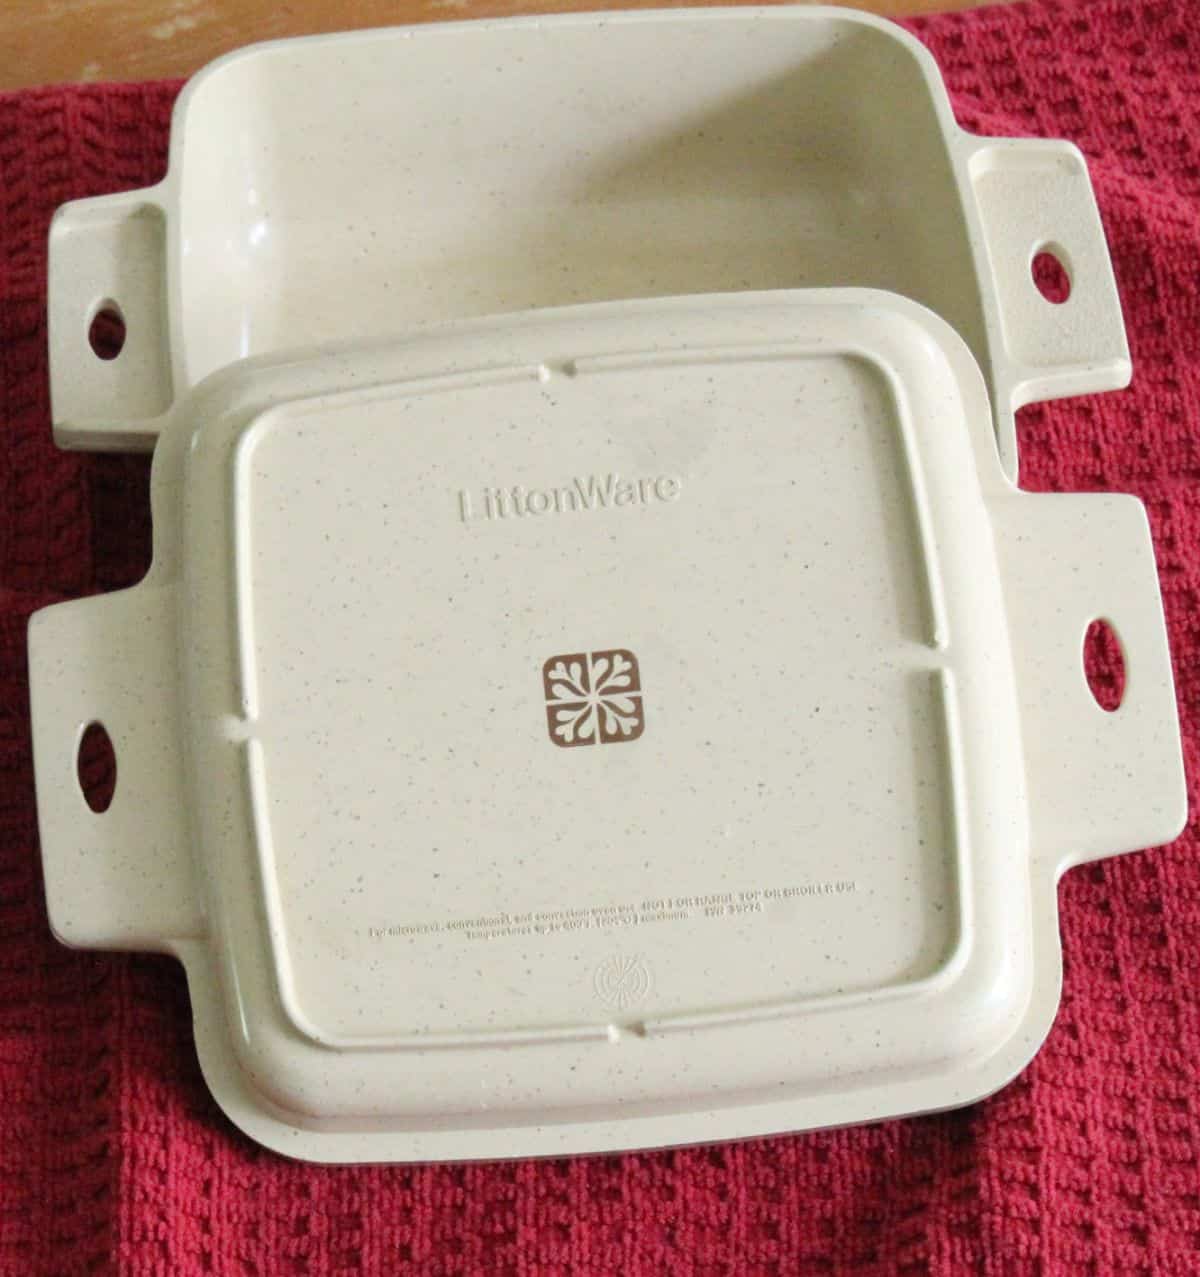 Littonware casserole on top of red kitchen towel